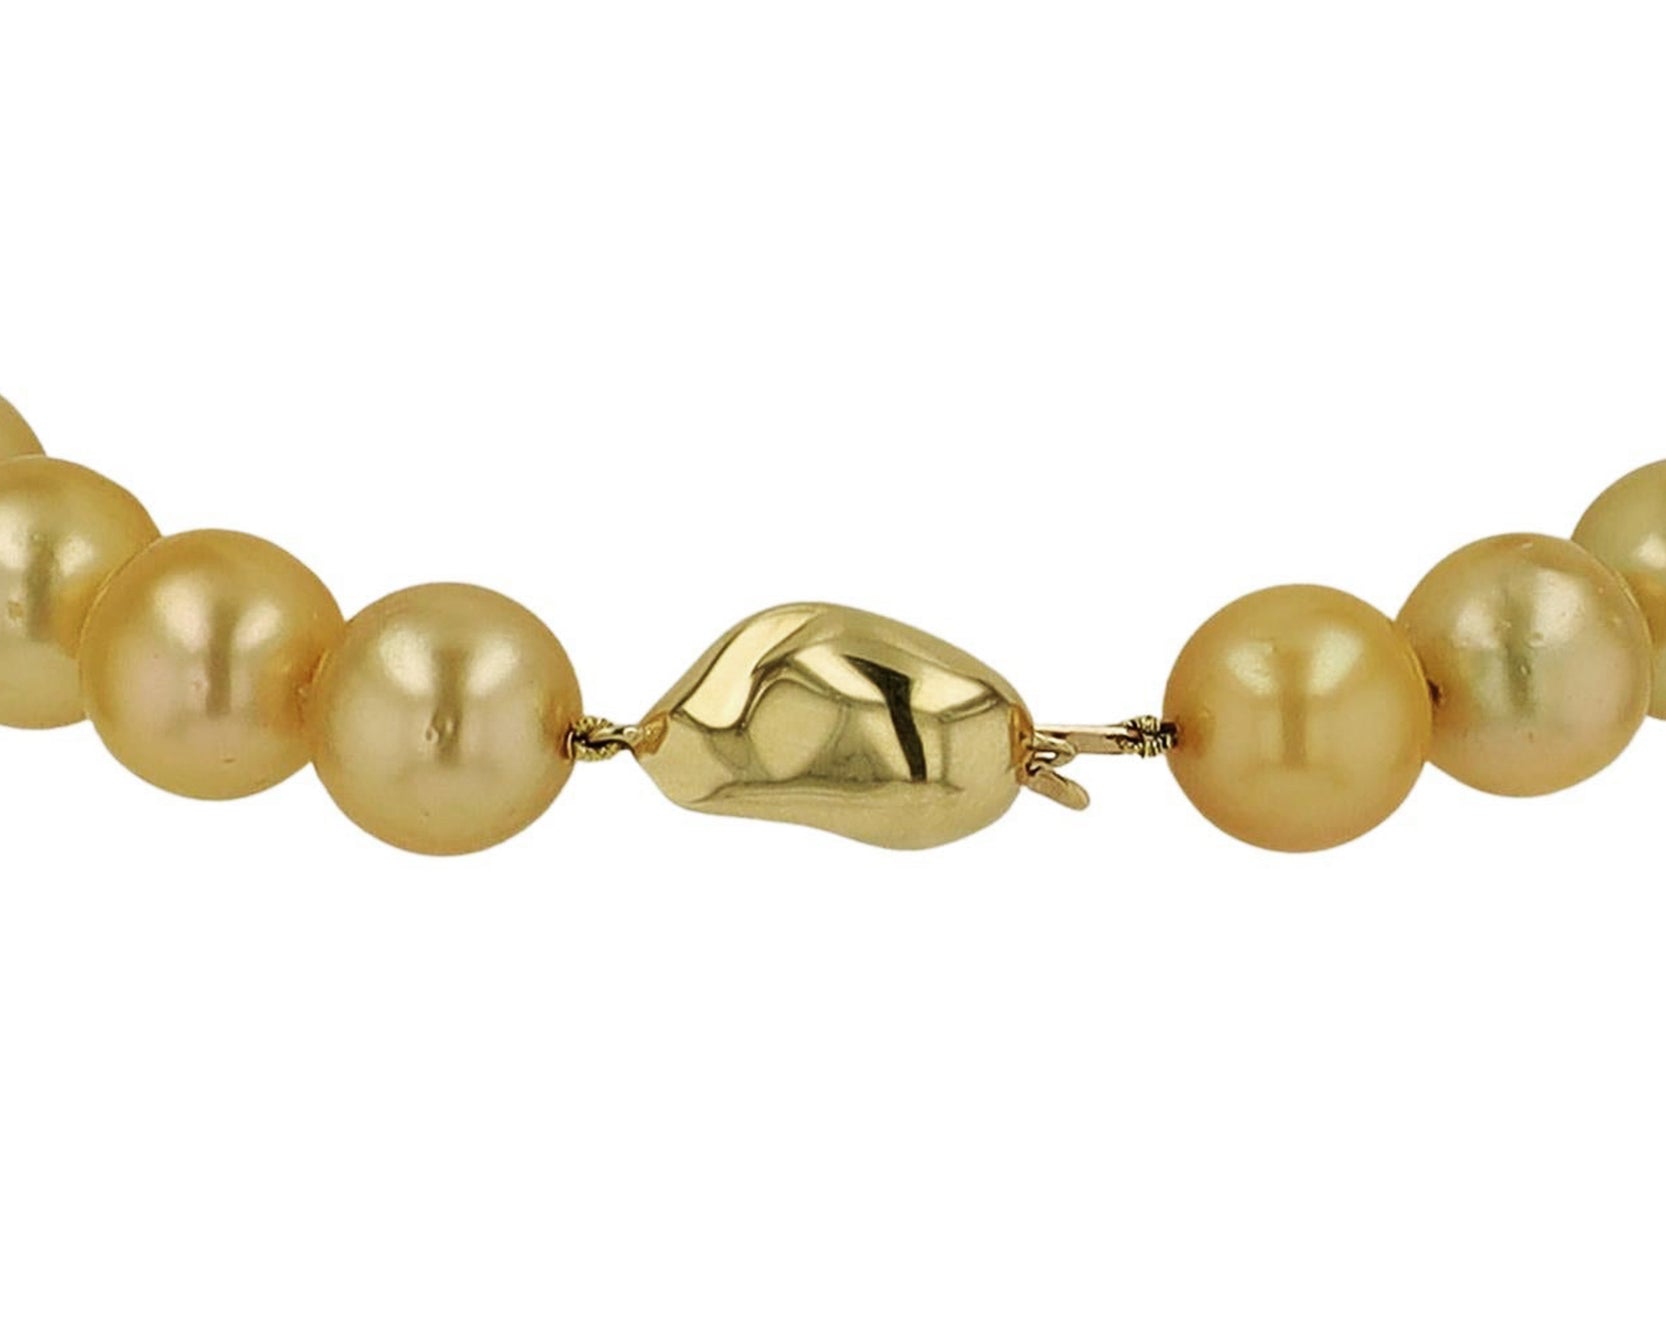 Graduated Golden South Sea Pearl Necklace